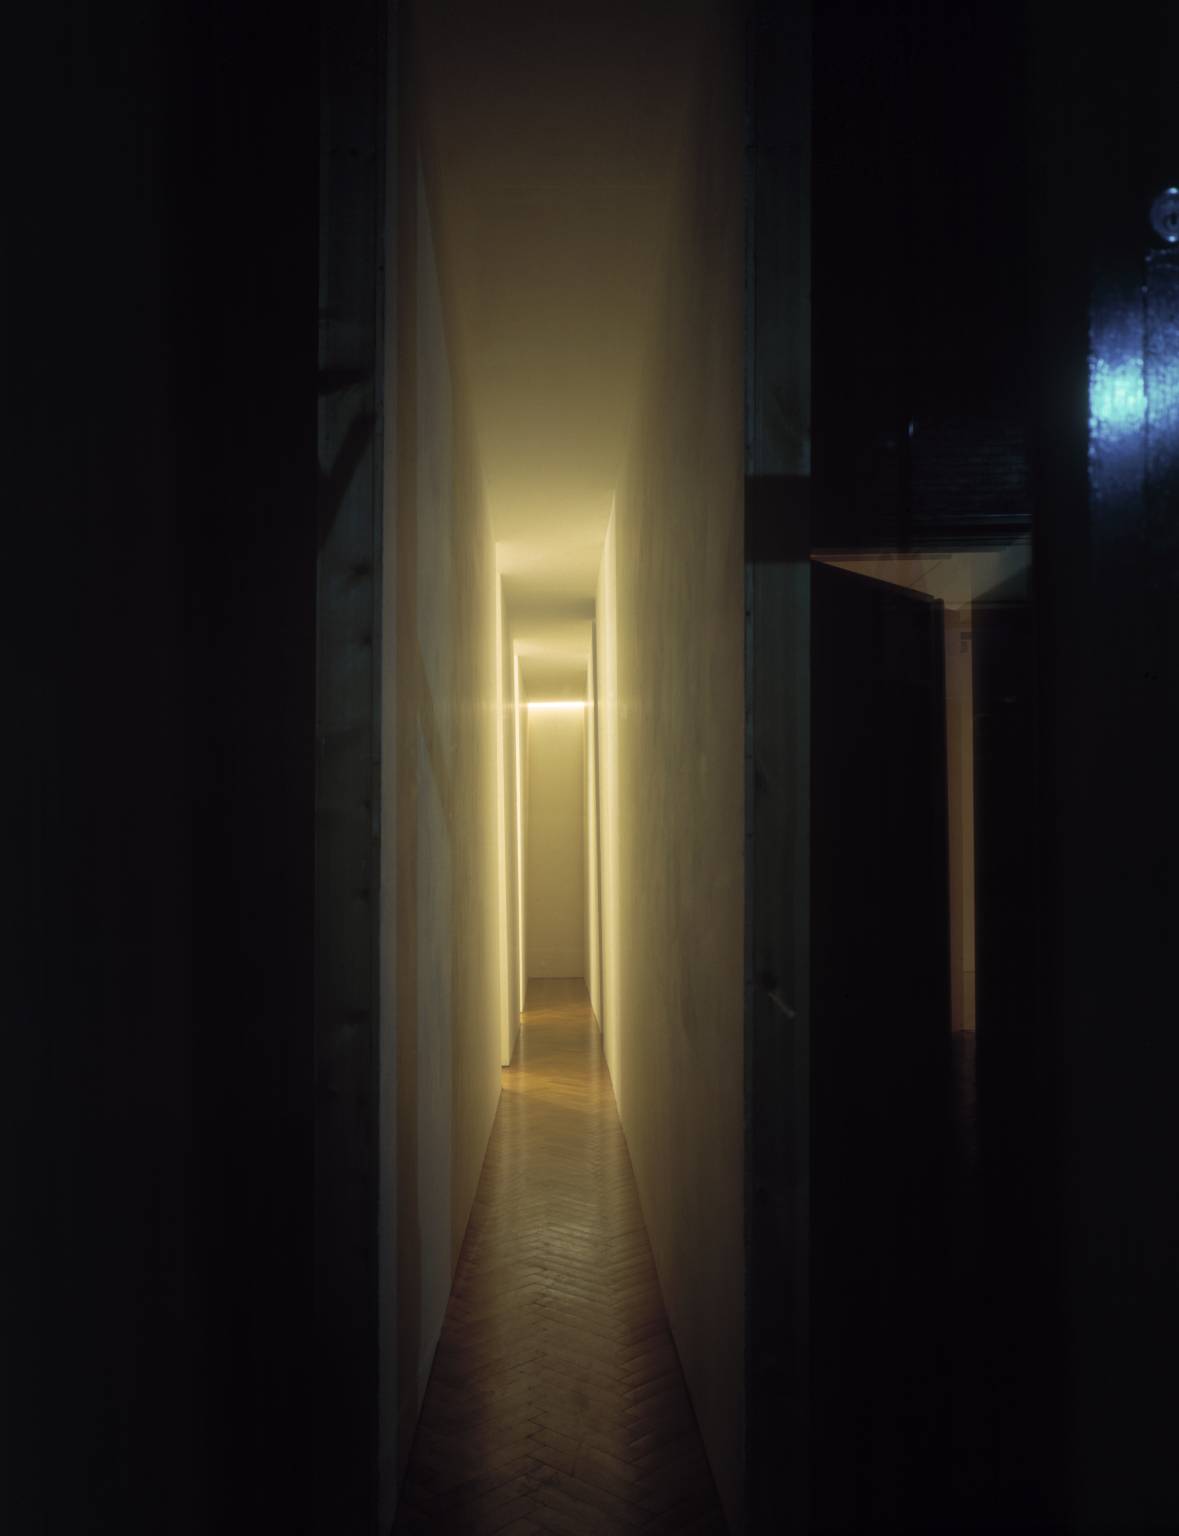 Changing Light Corridor with Rooms (1971) by Bruce Nauman